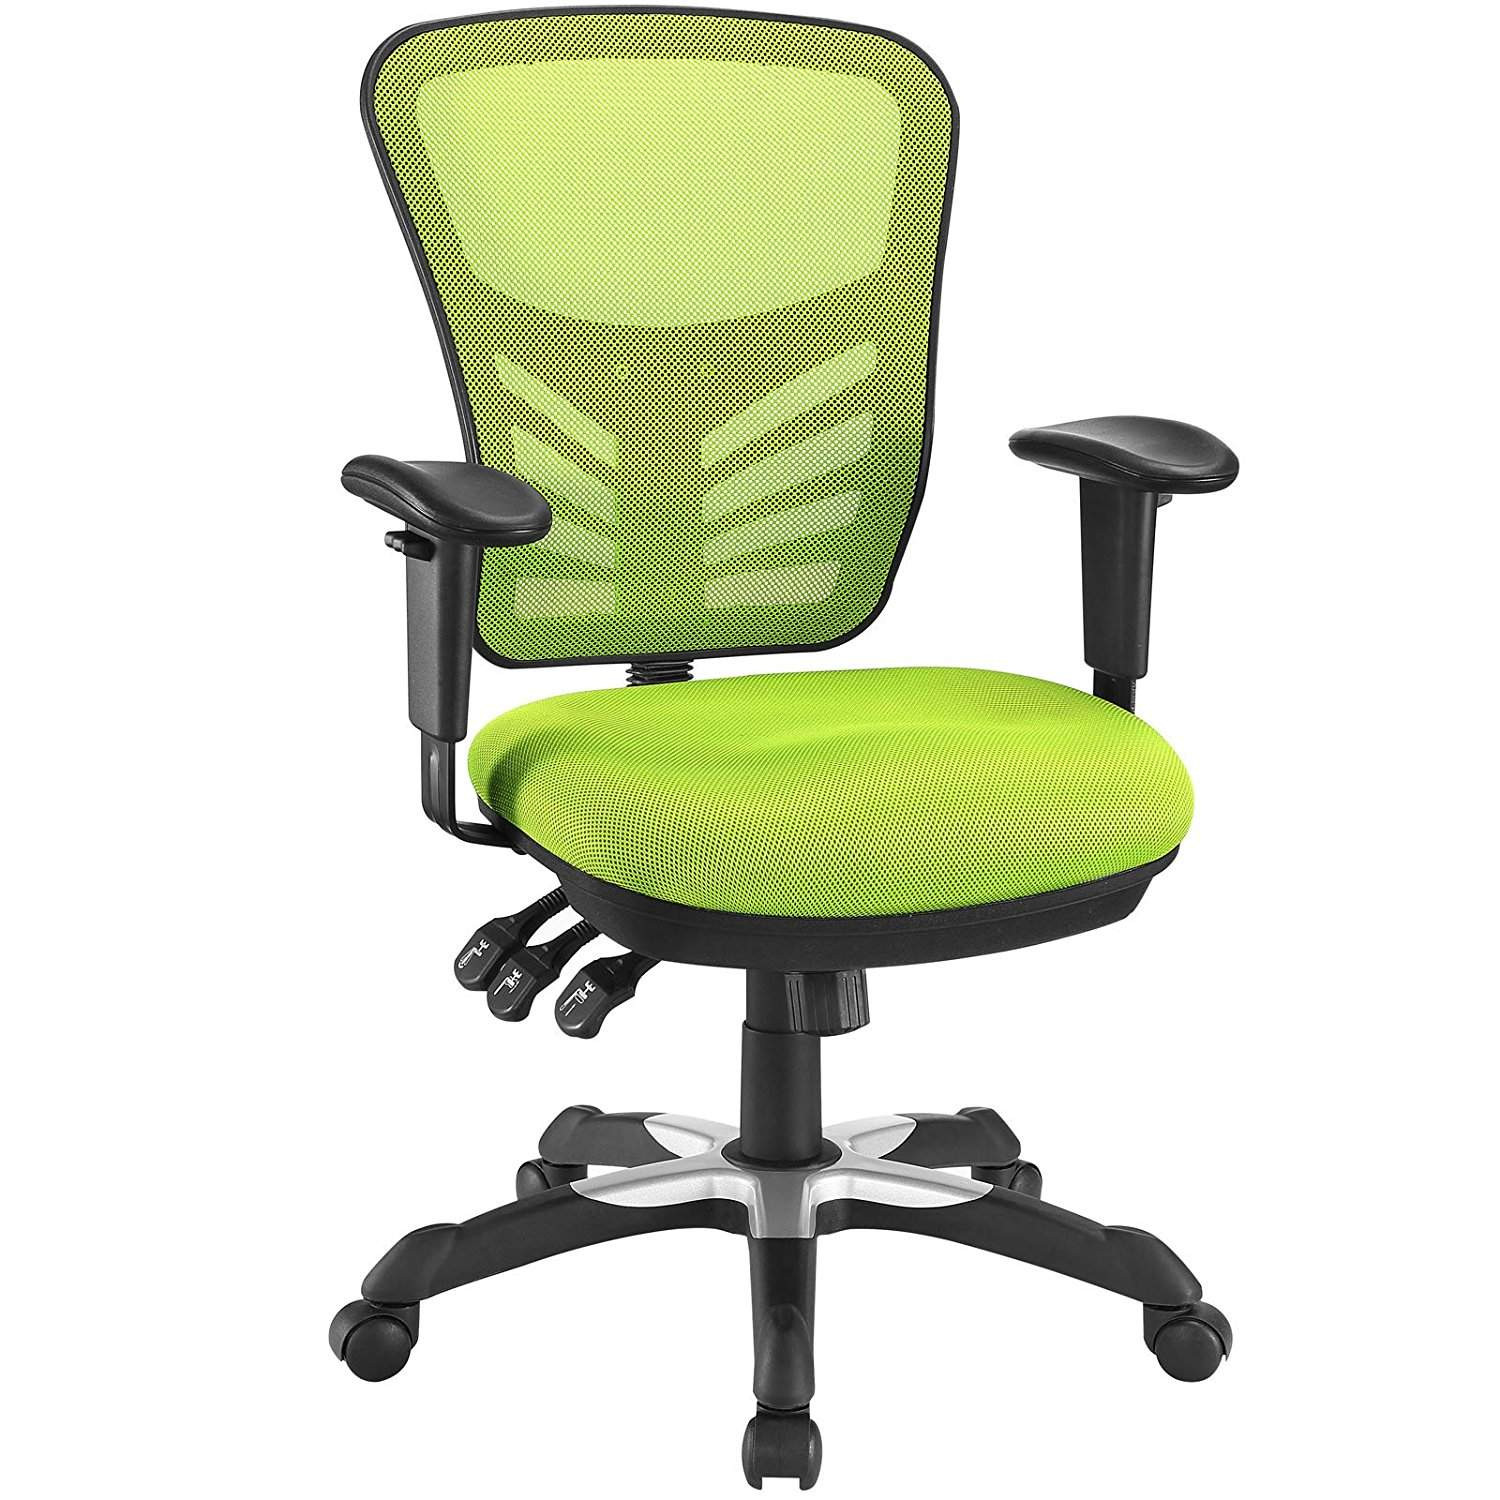 Best ideas about Ergonomic Office Chair
. Save or Pin Top 10 Best Ergonomic fice Chairs 2018 Now.